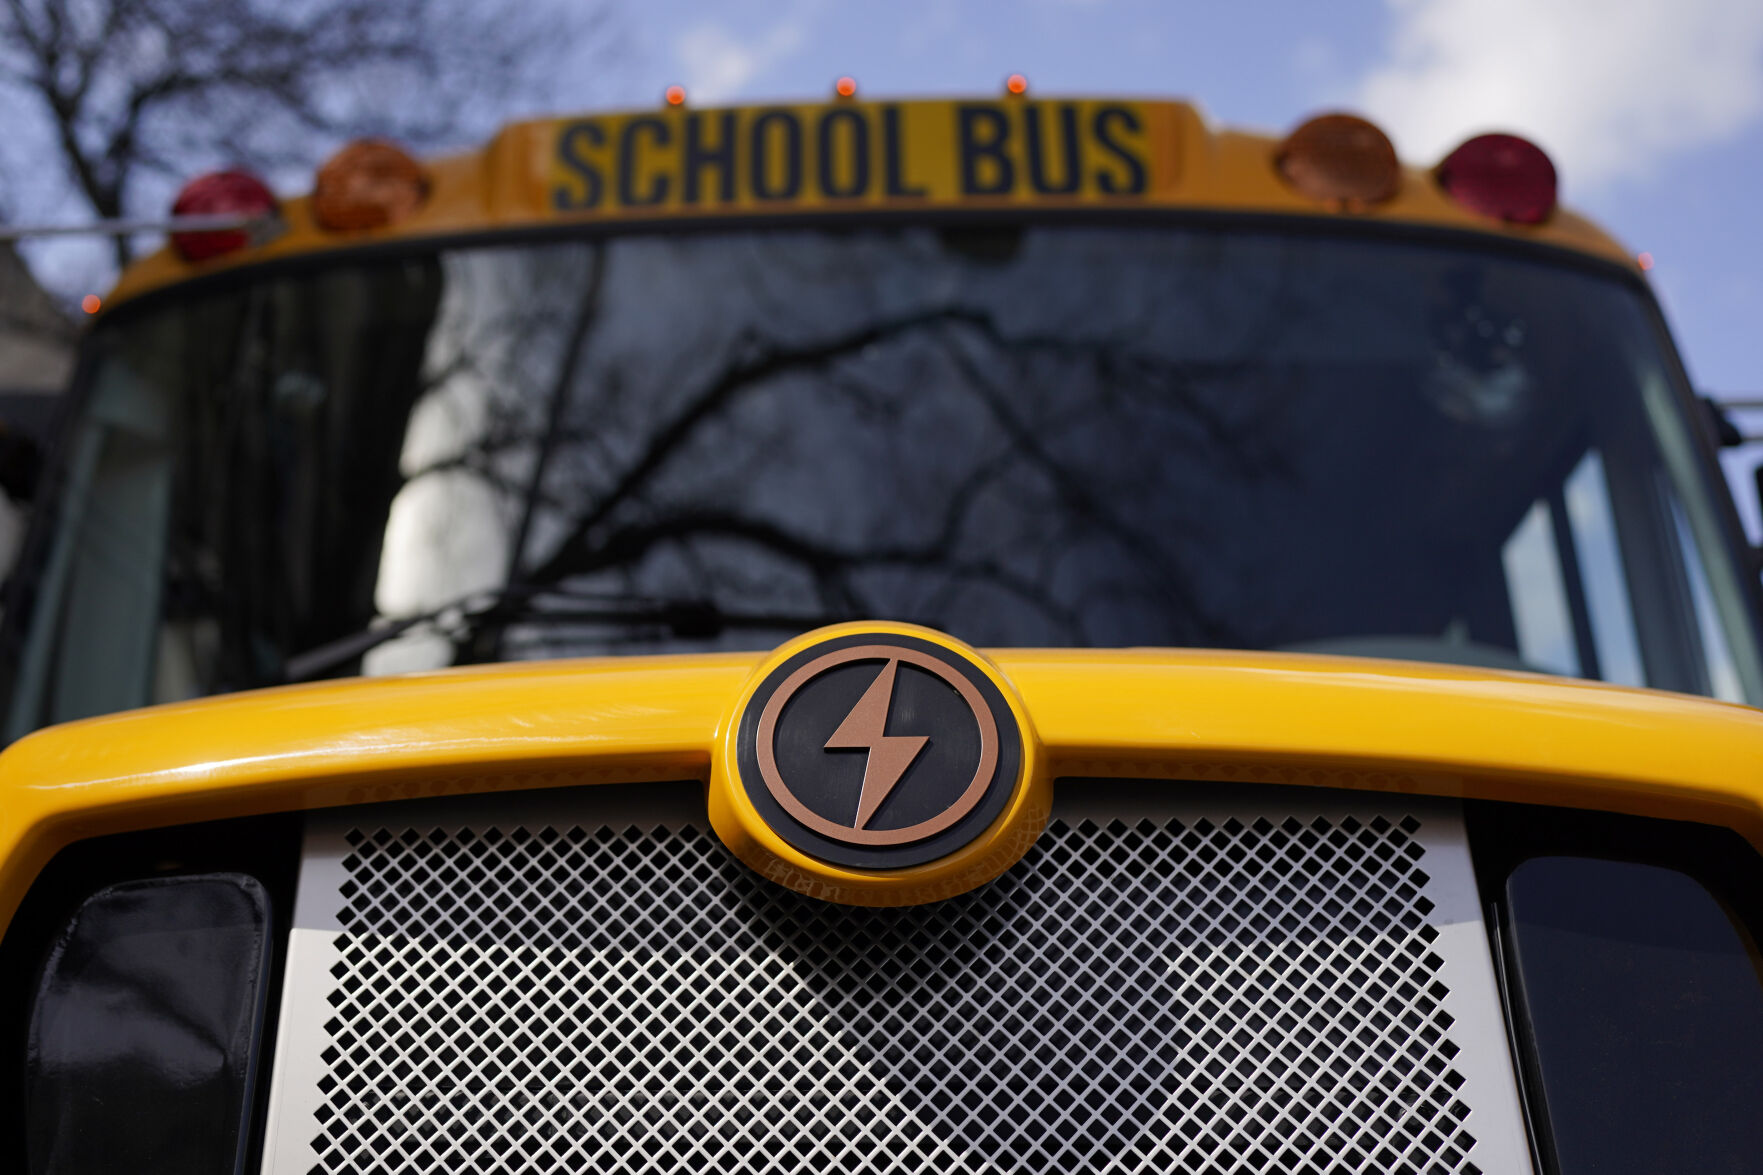 <p>FILE - A Lion electric school bus is seen on display in Austin, Texas, Feb. 22, 2023. The Transportation Department is awarding almost $1.7 billion in grants for buying zero and low emission buses, with the money going to transit projects in 46 states and territories. The grants will enable transit agencies and state and local governments to buy 1,700 U.S.-built buses, nearly half of which will have zero carbon emissions. (AP Photo/Eric Gay, File)</p>   PHOTO CREDIT: Eric Gay